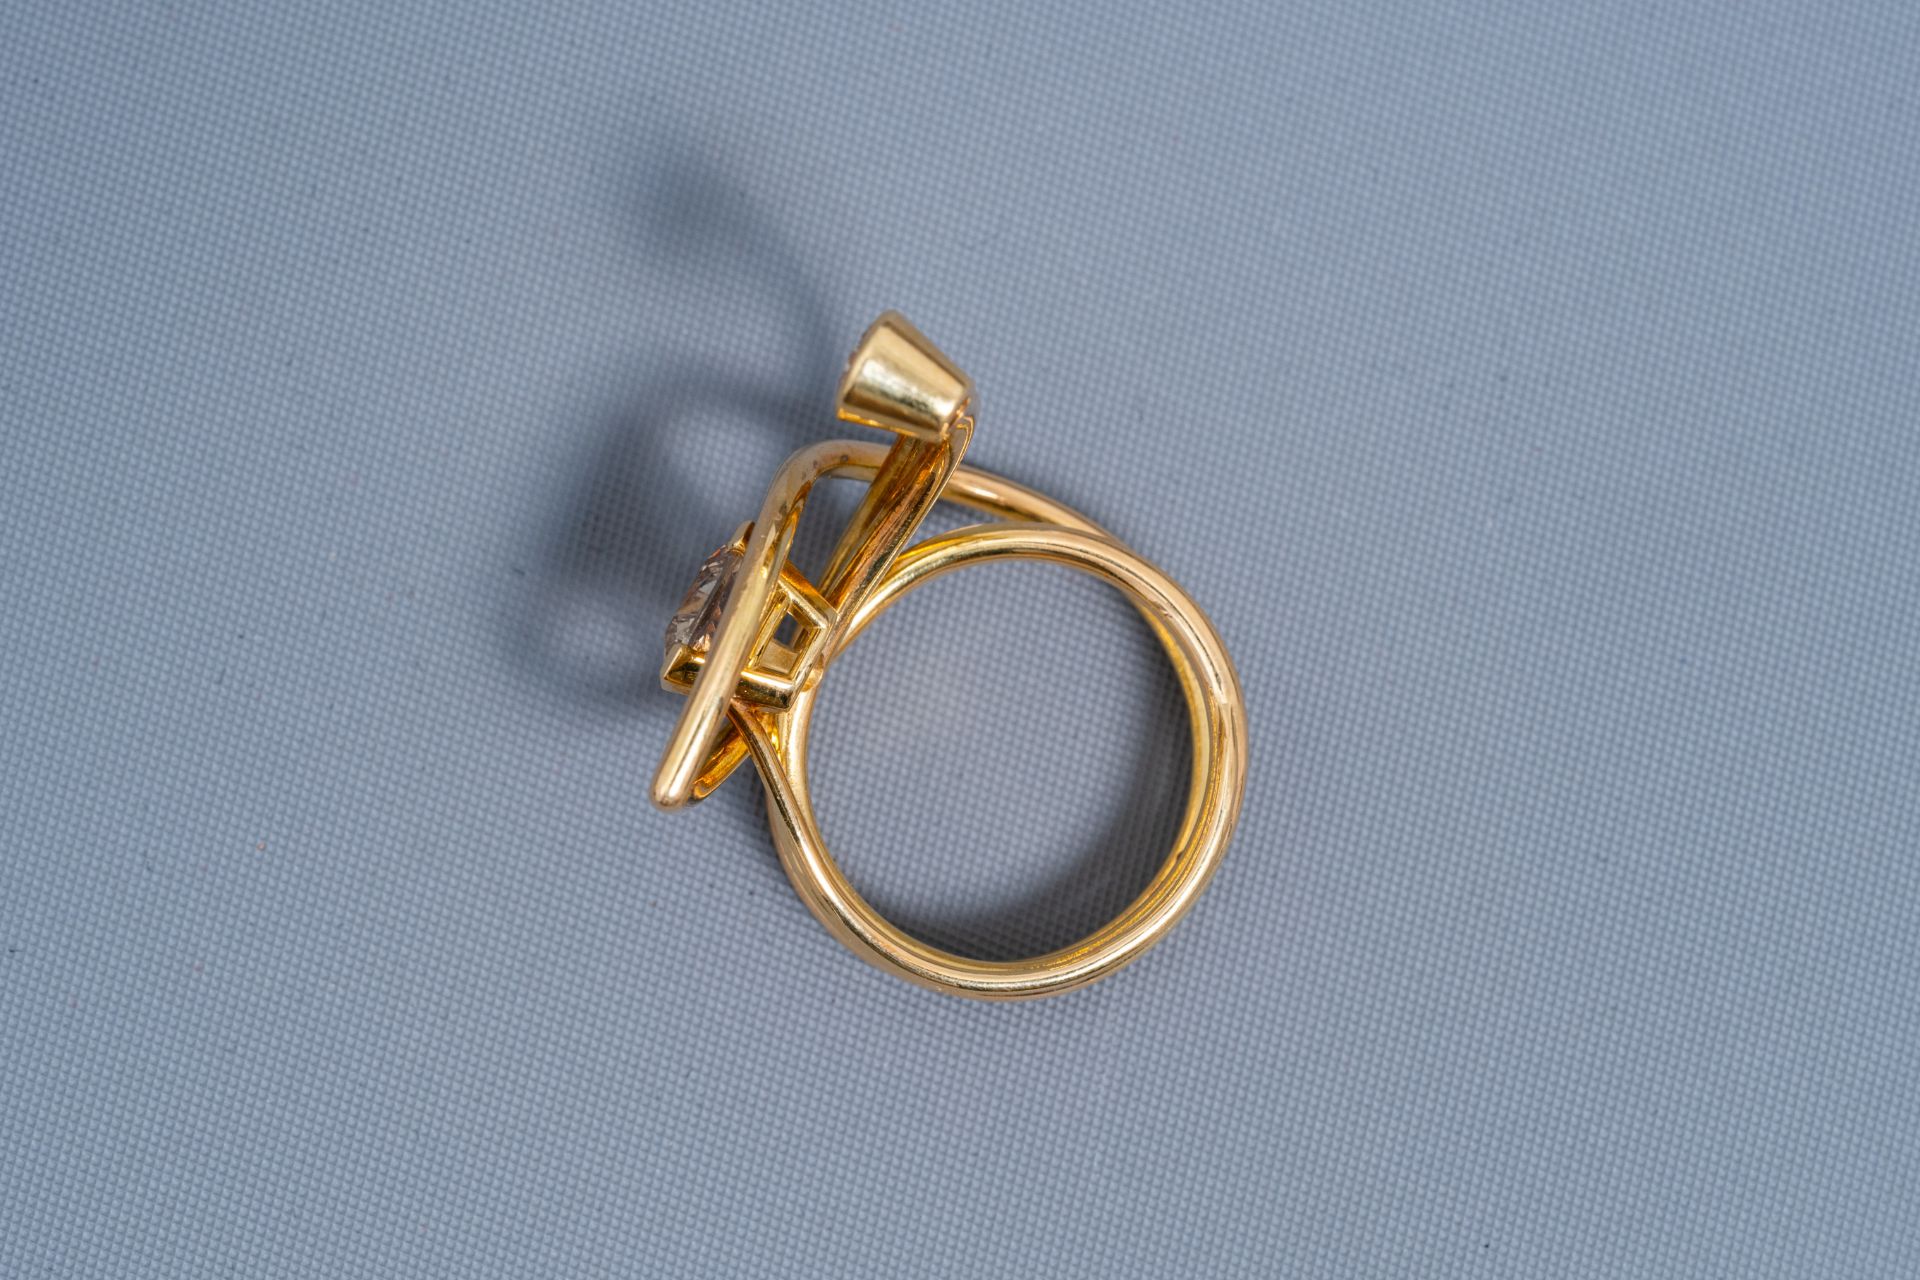 An 18 carat yellow gold ring set with a sapphire and two diamonds, 20th C. - Image 3 of 6